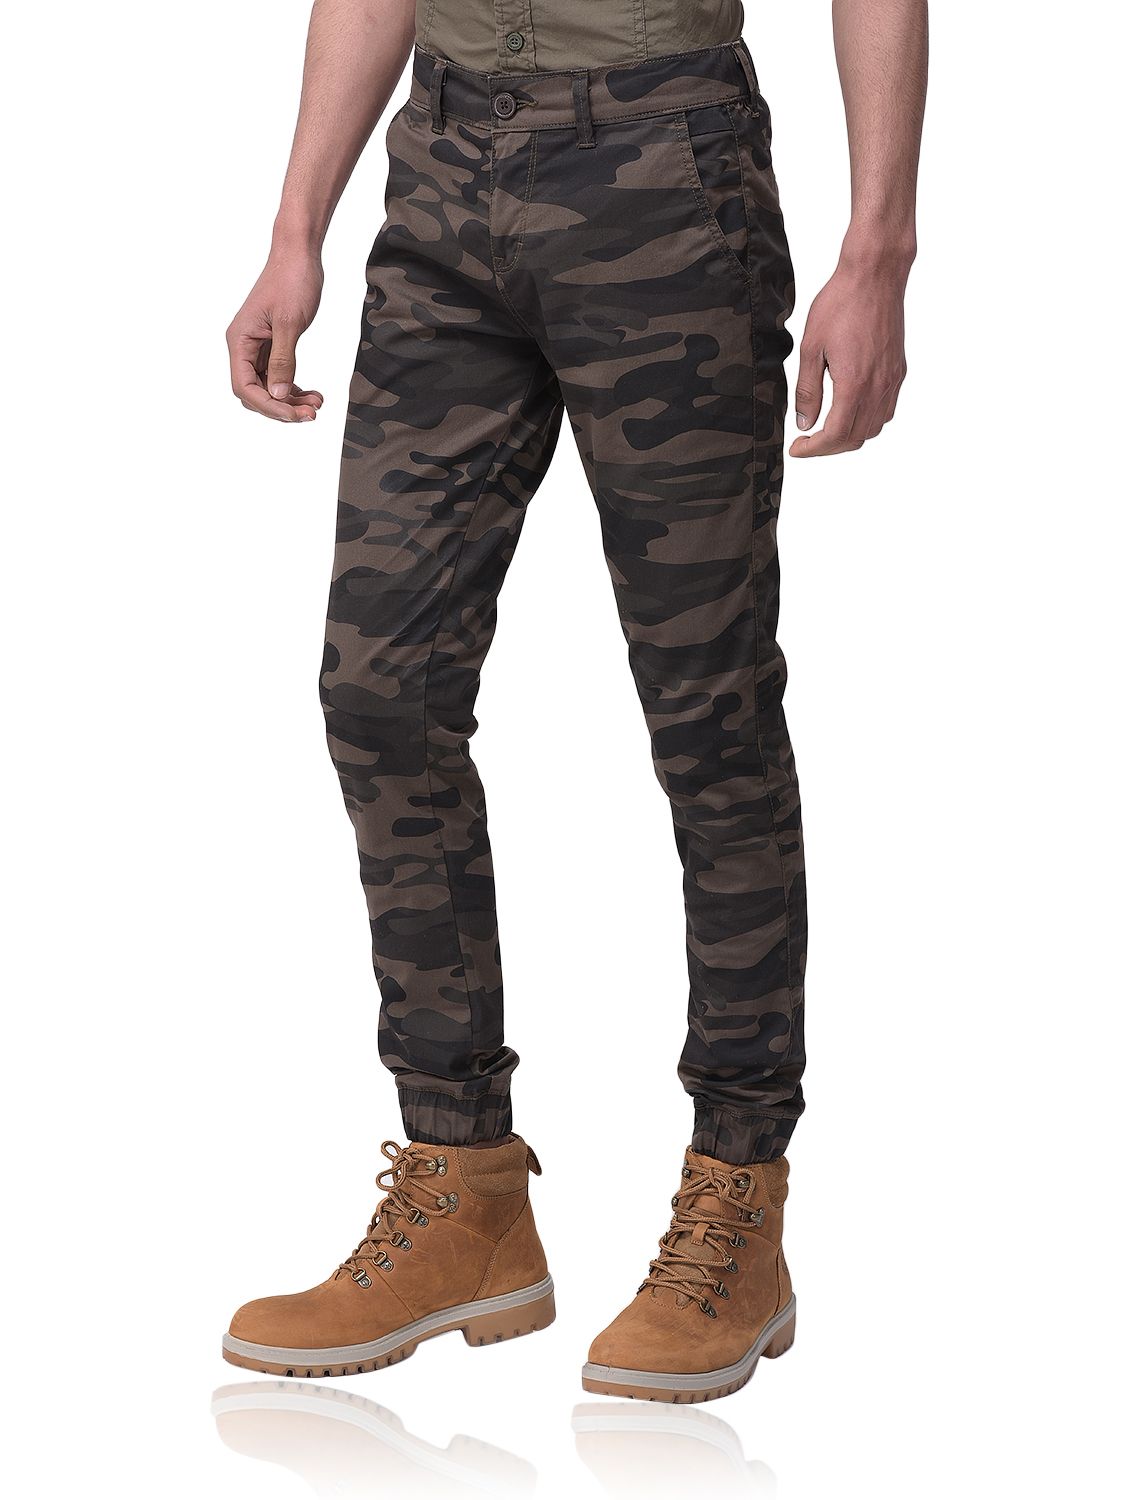 Camouflage olive jogger pants